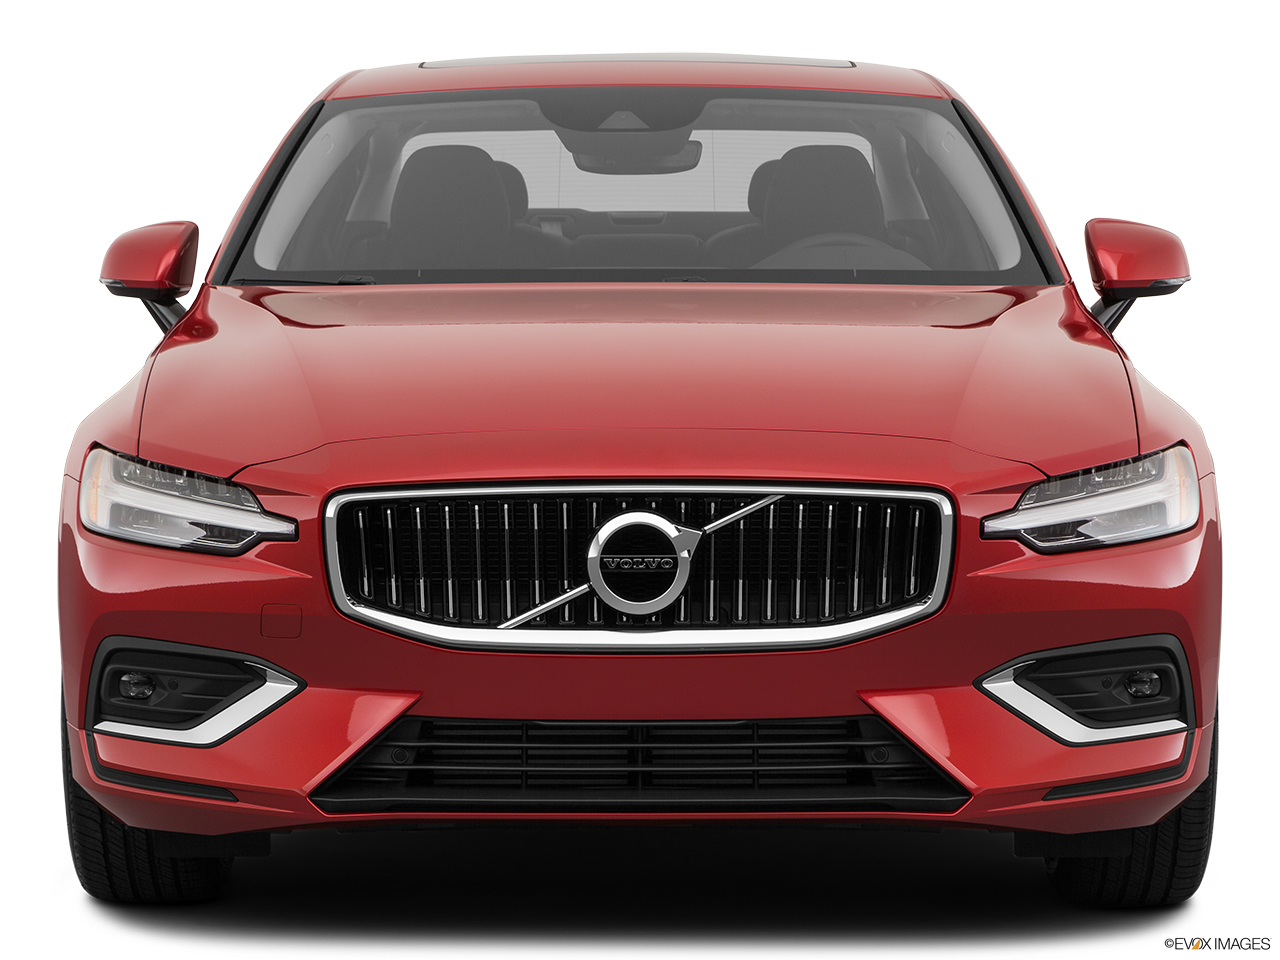 2020 Volvo S60 T5 Inscription Low/wide front. 